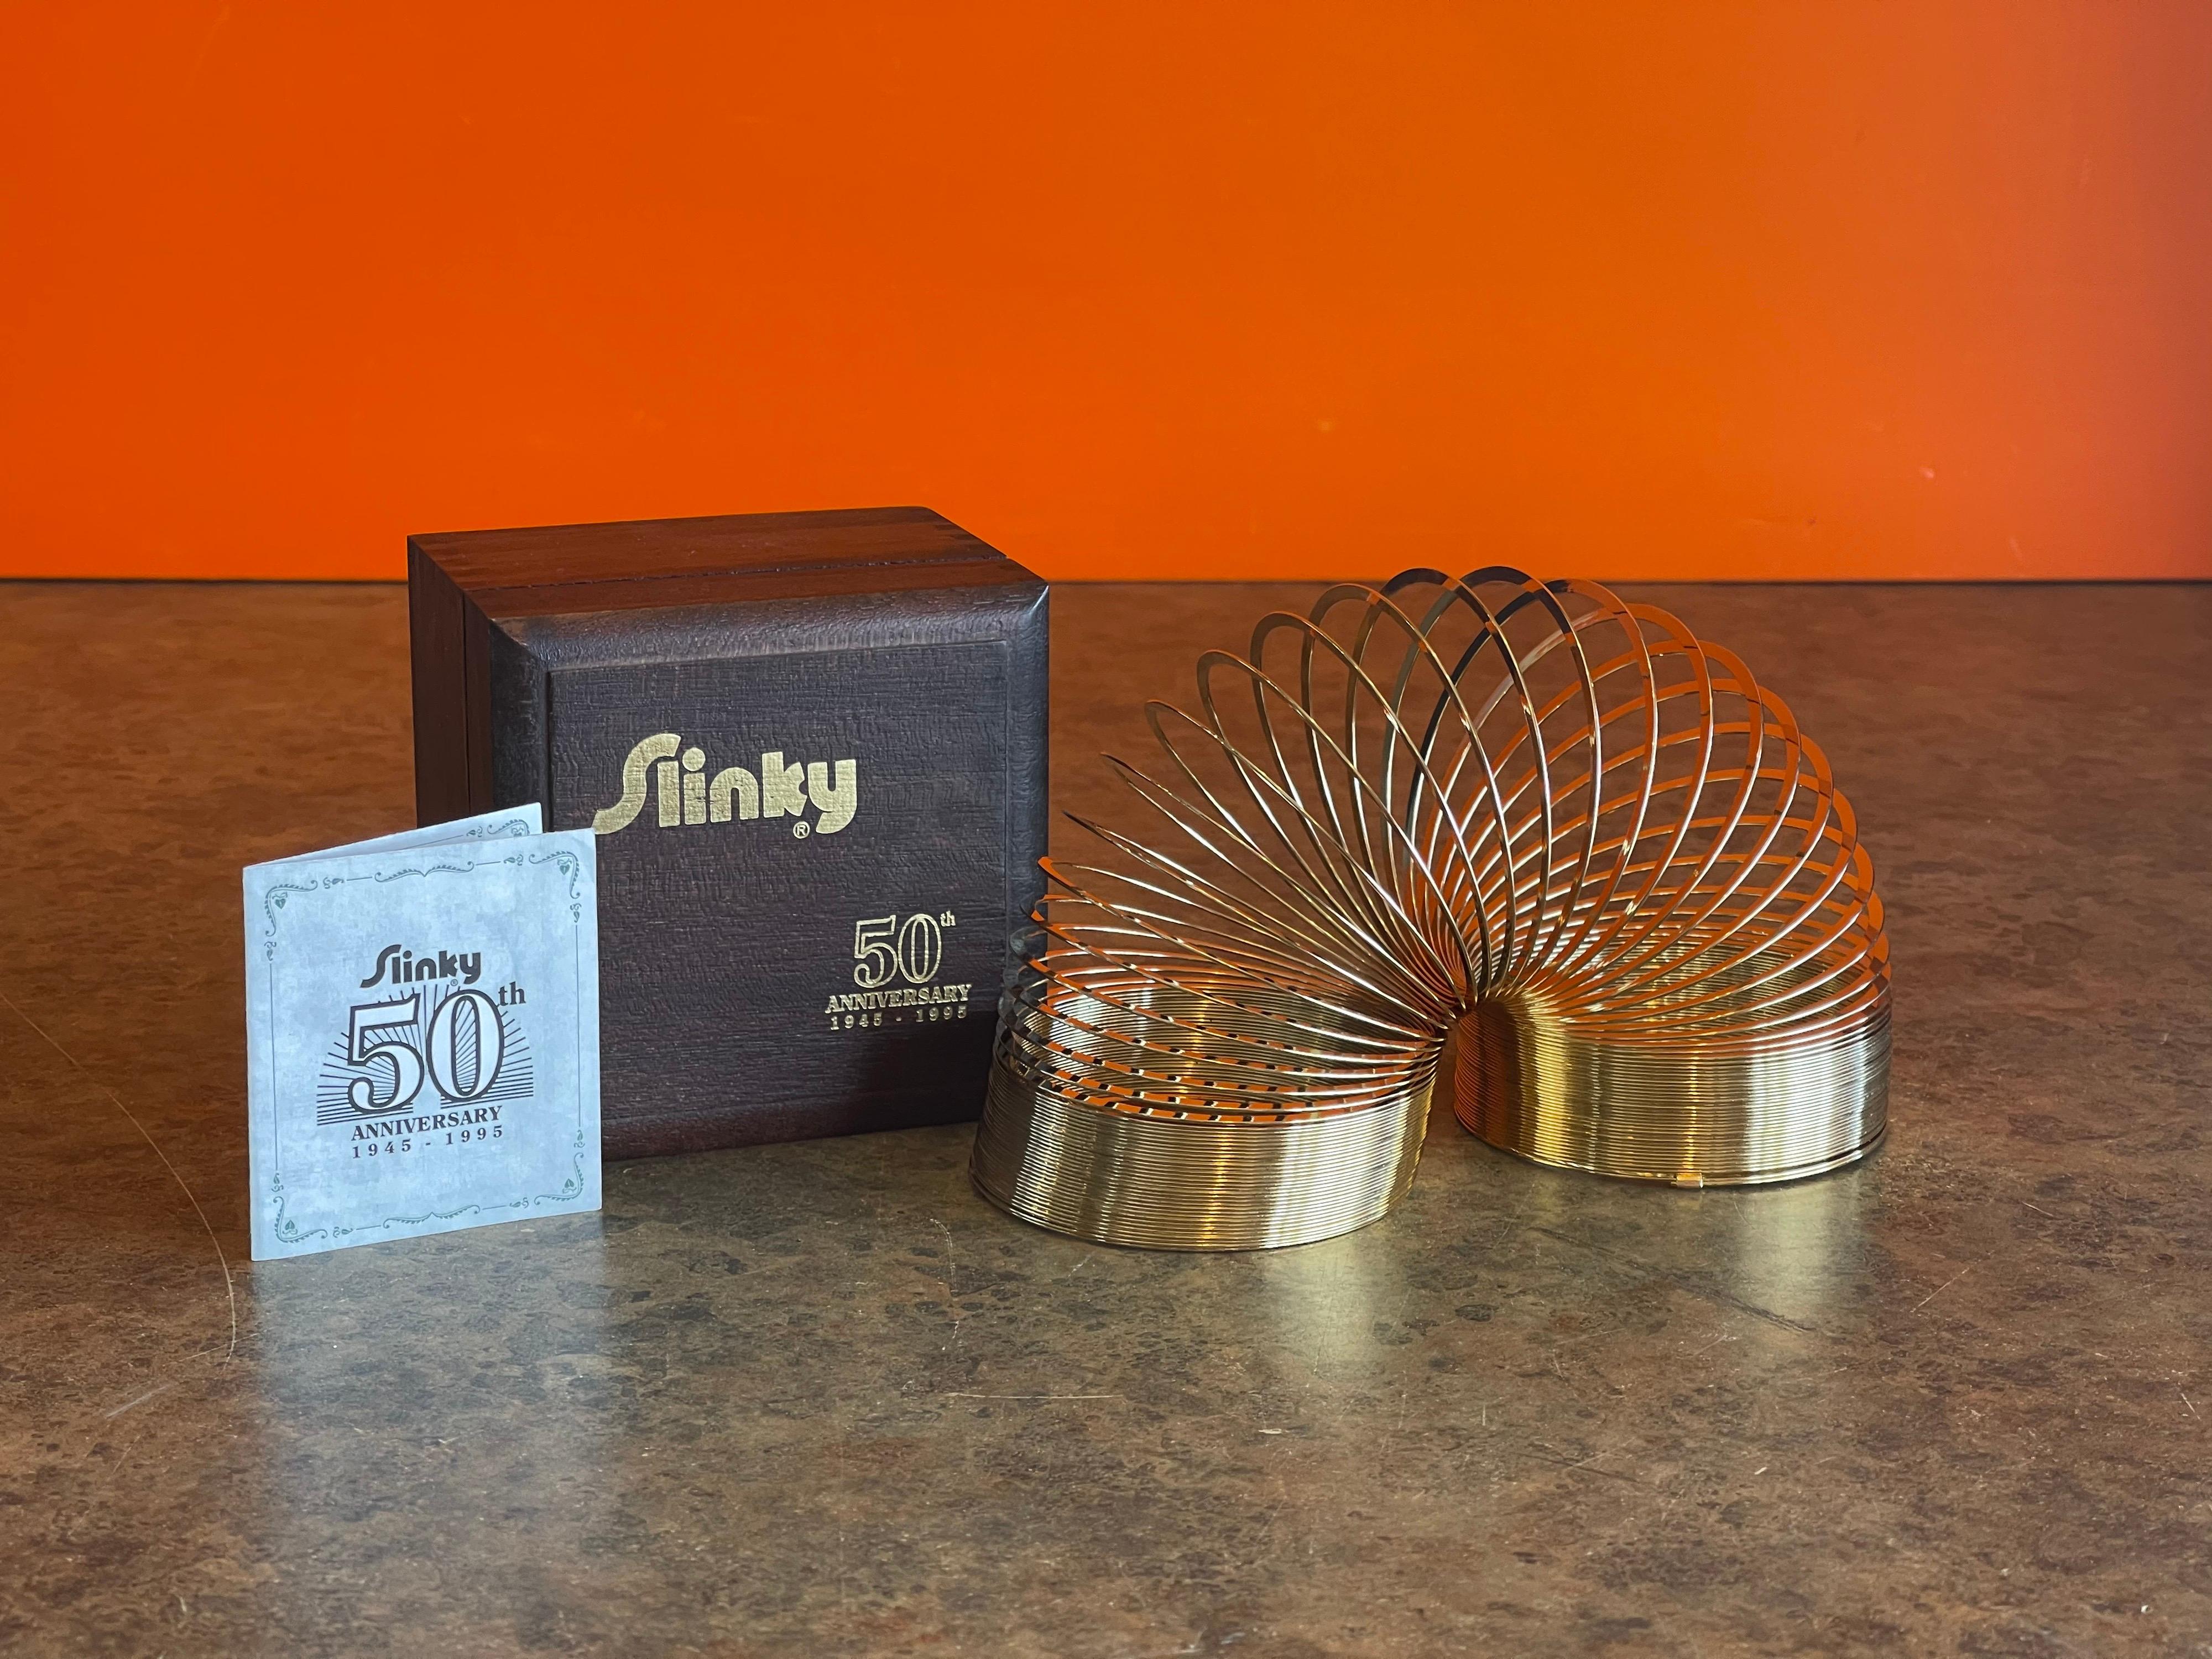 Brass 50th Anniversary Gold-Plated Slinky Toy in Wood Box